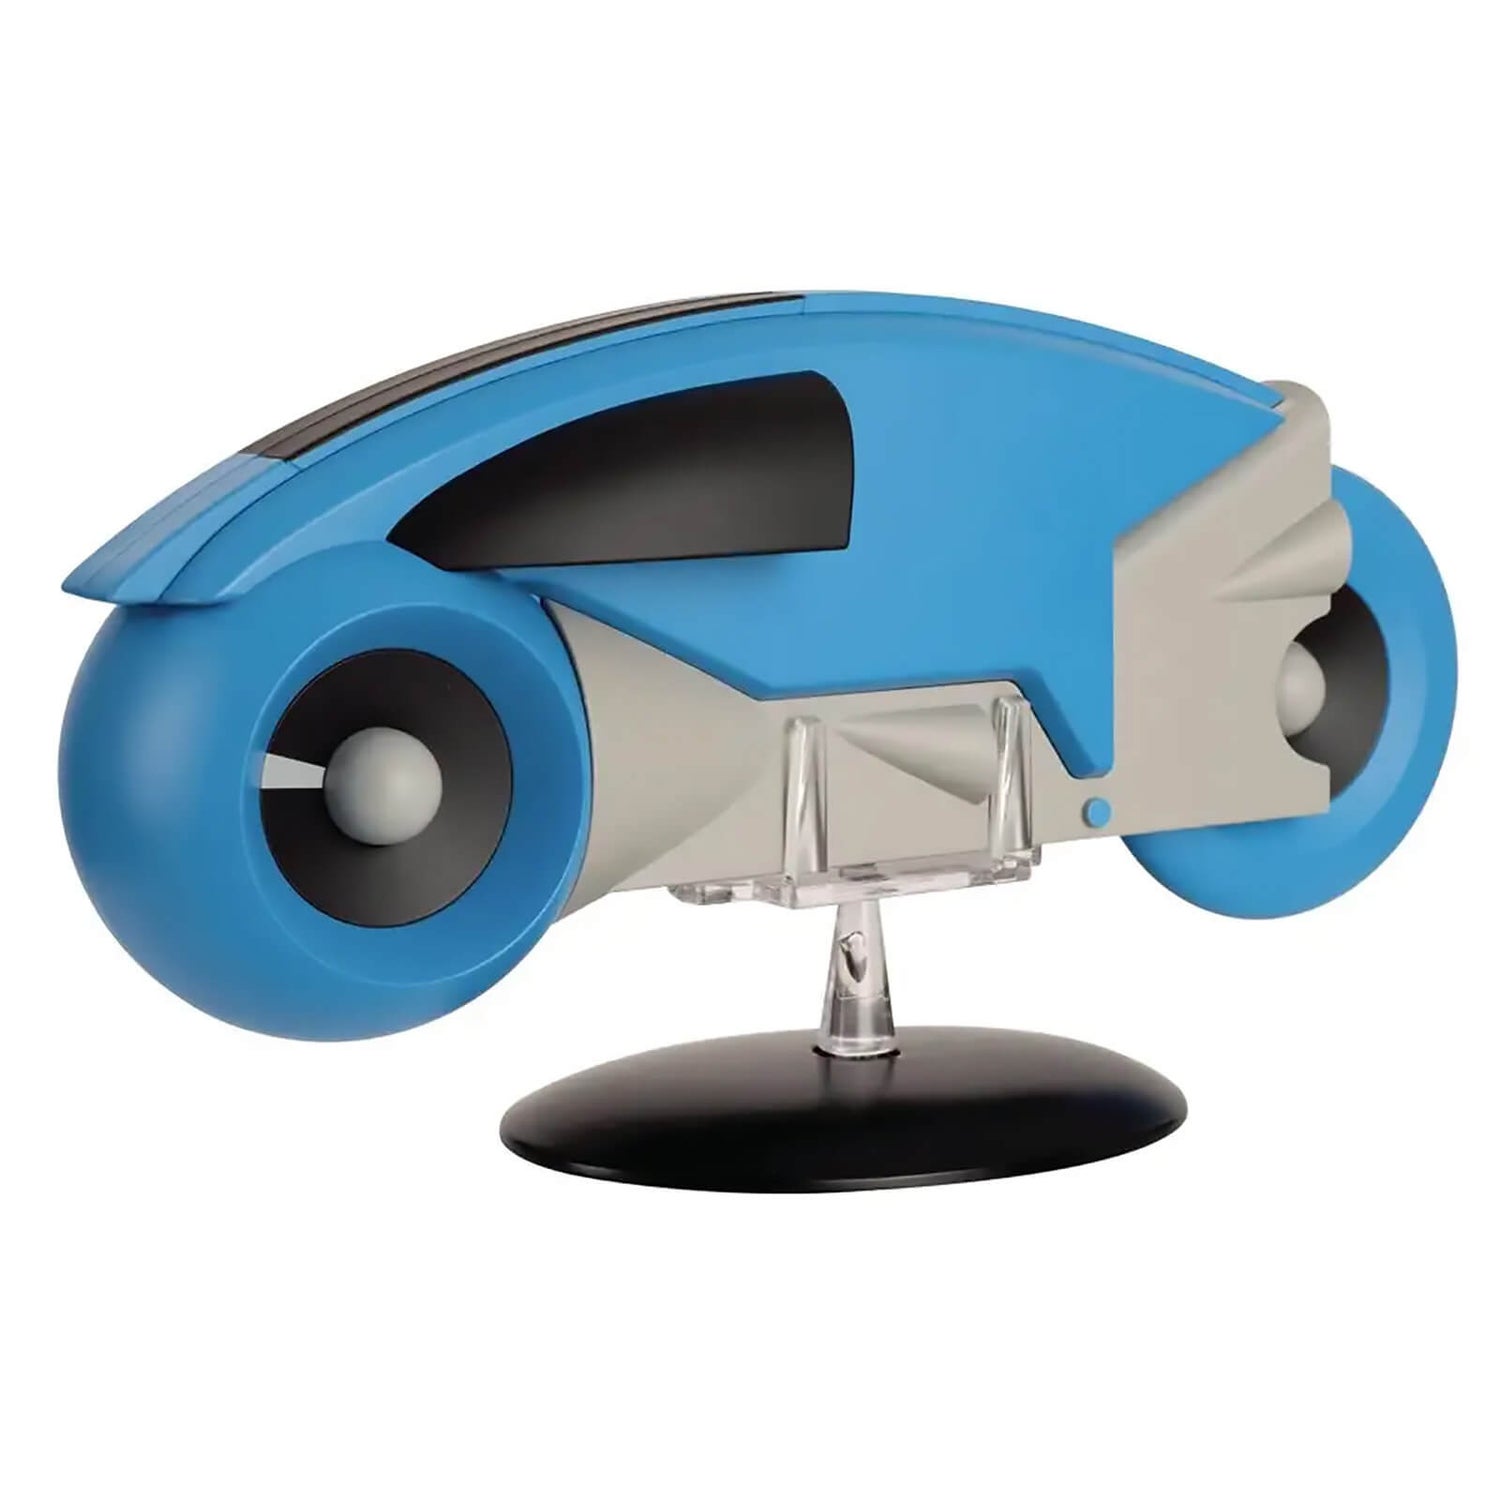 Eaglemoss Tron 1st Generation Life Cycle in Blue